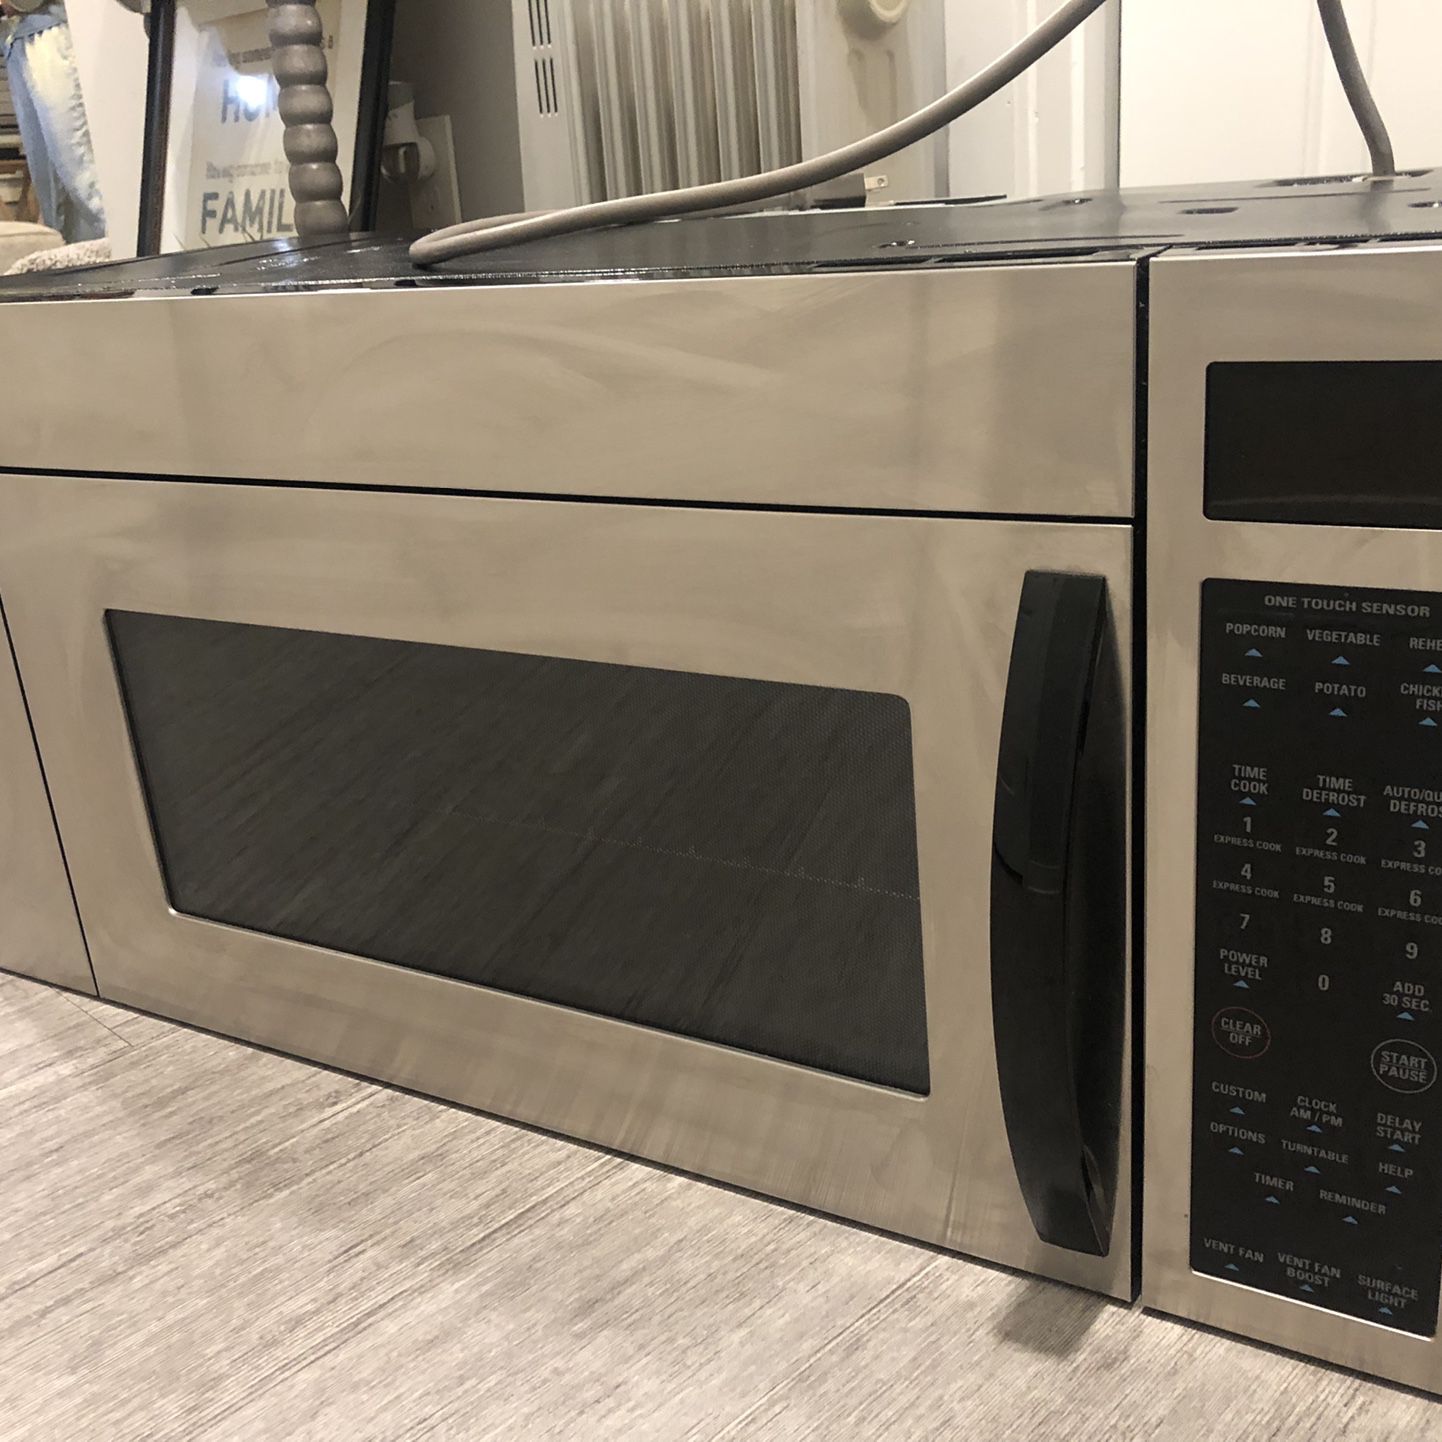 Microwave Oven For Sale for Sale in Philadelphia, PA - OfferUp